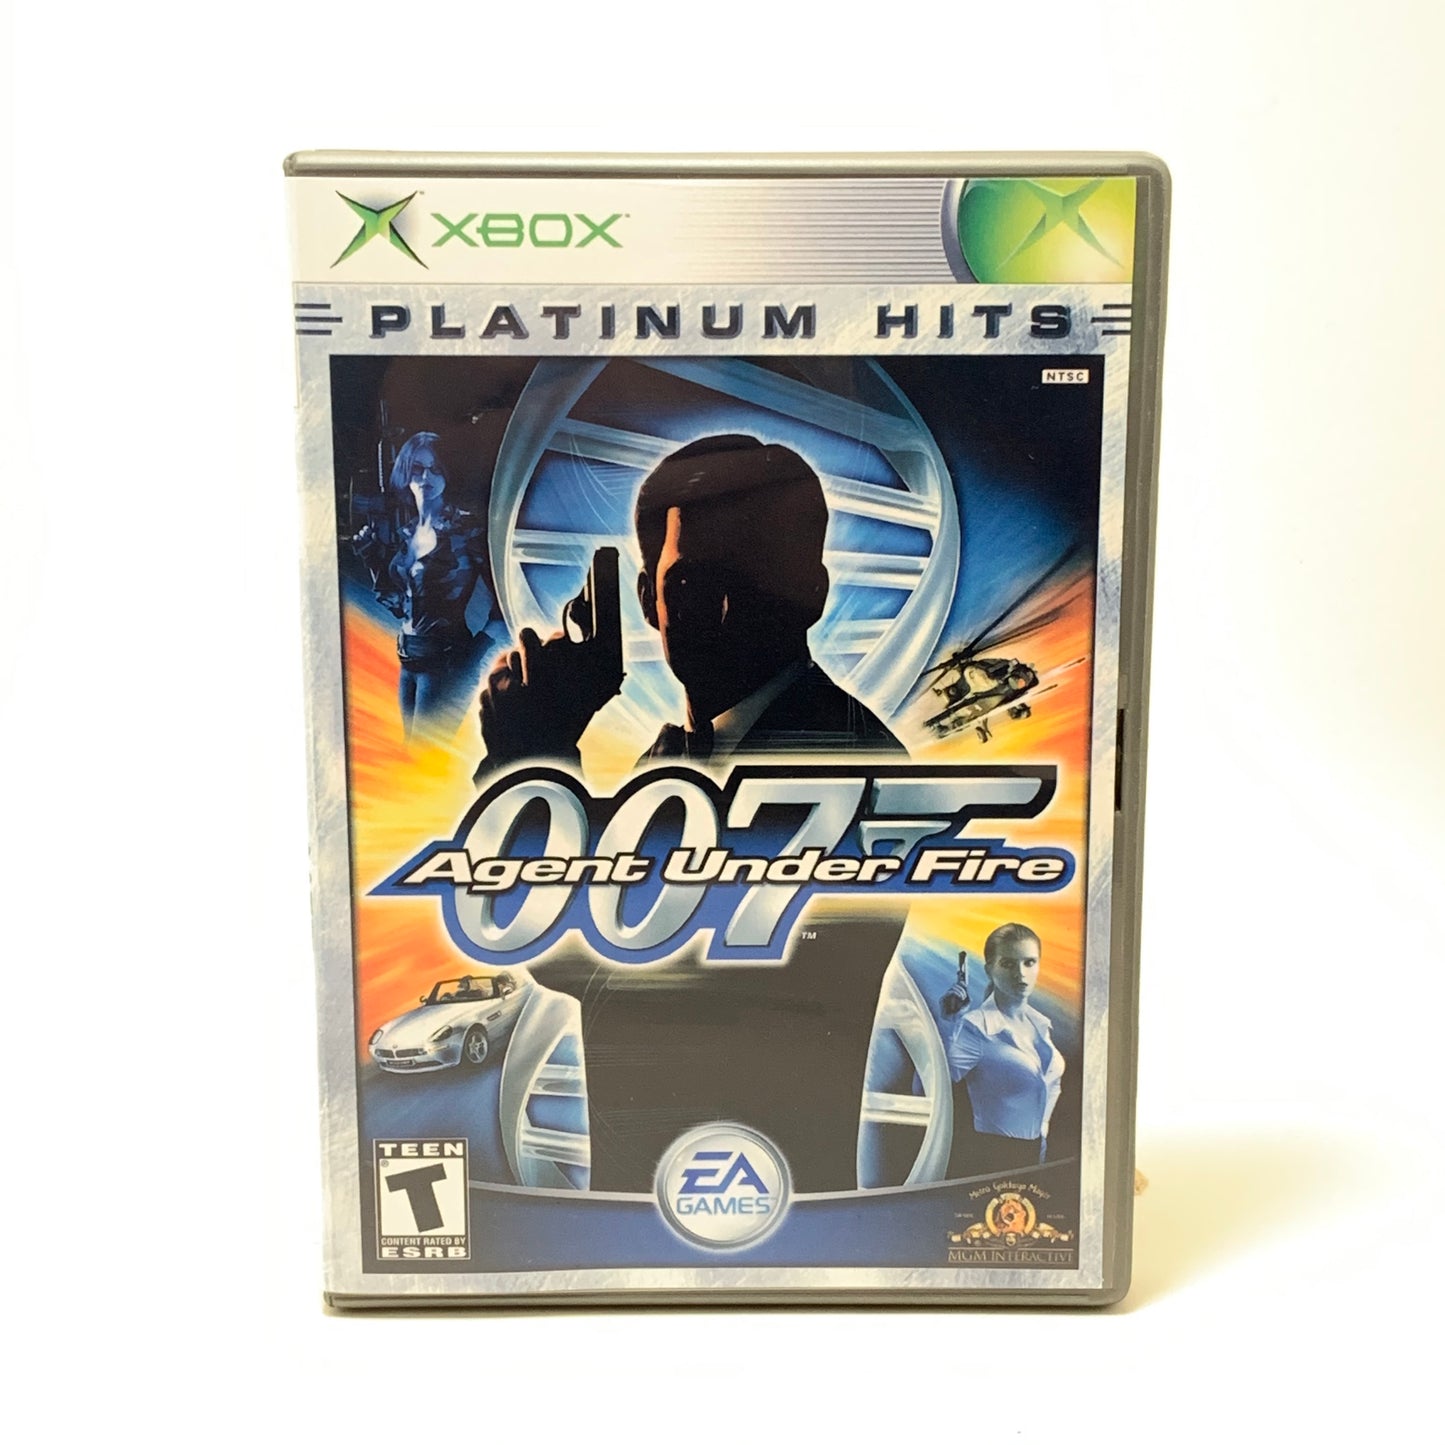 XBox - NO GAME - 007 Agent Under Fire [Platinum Hits]